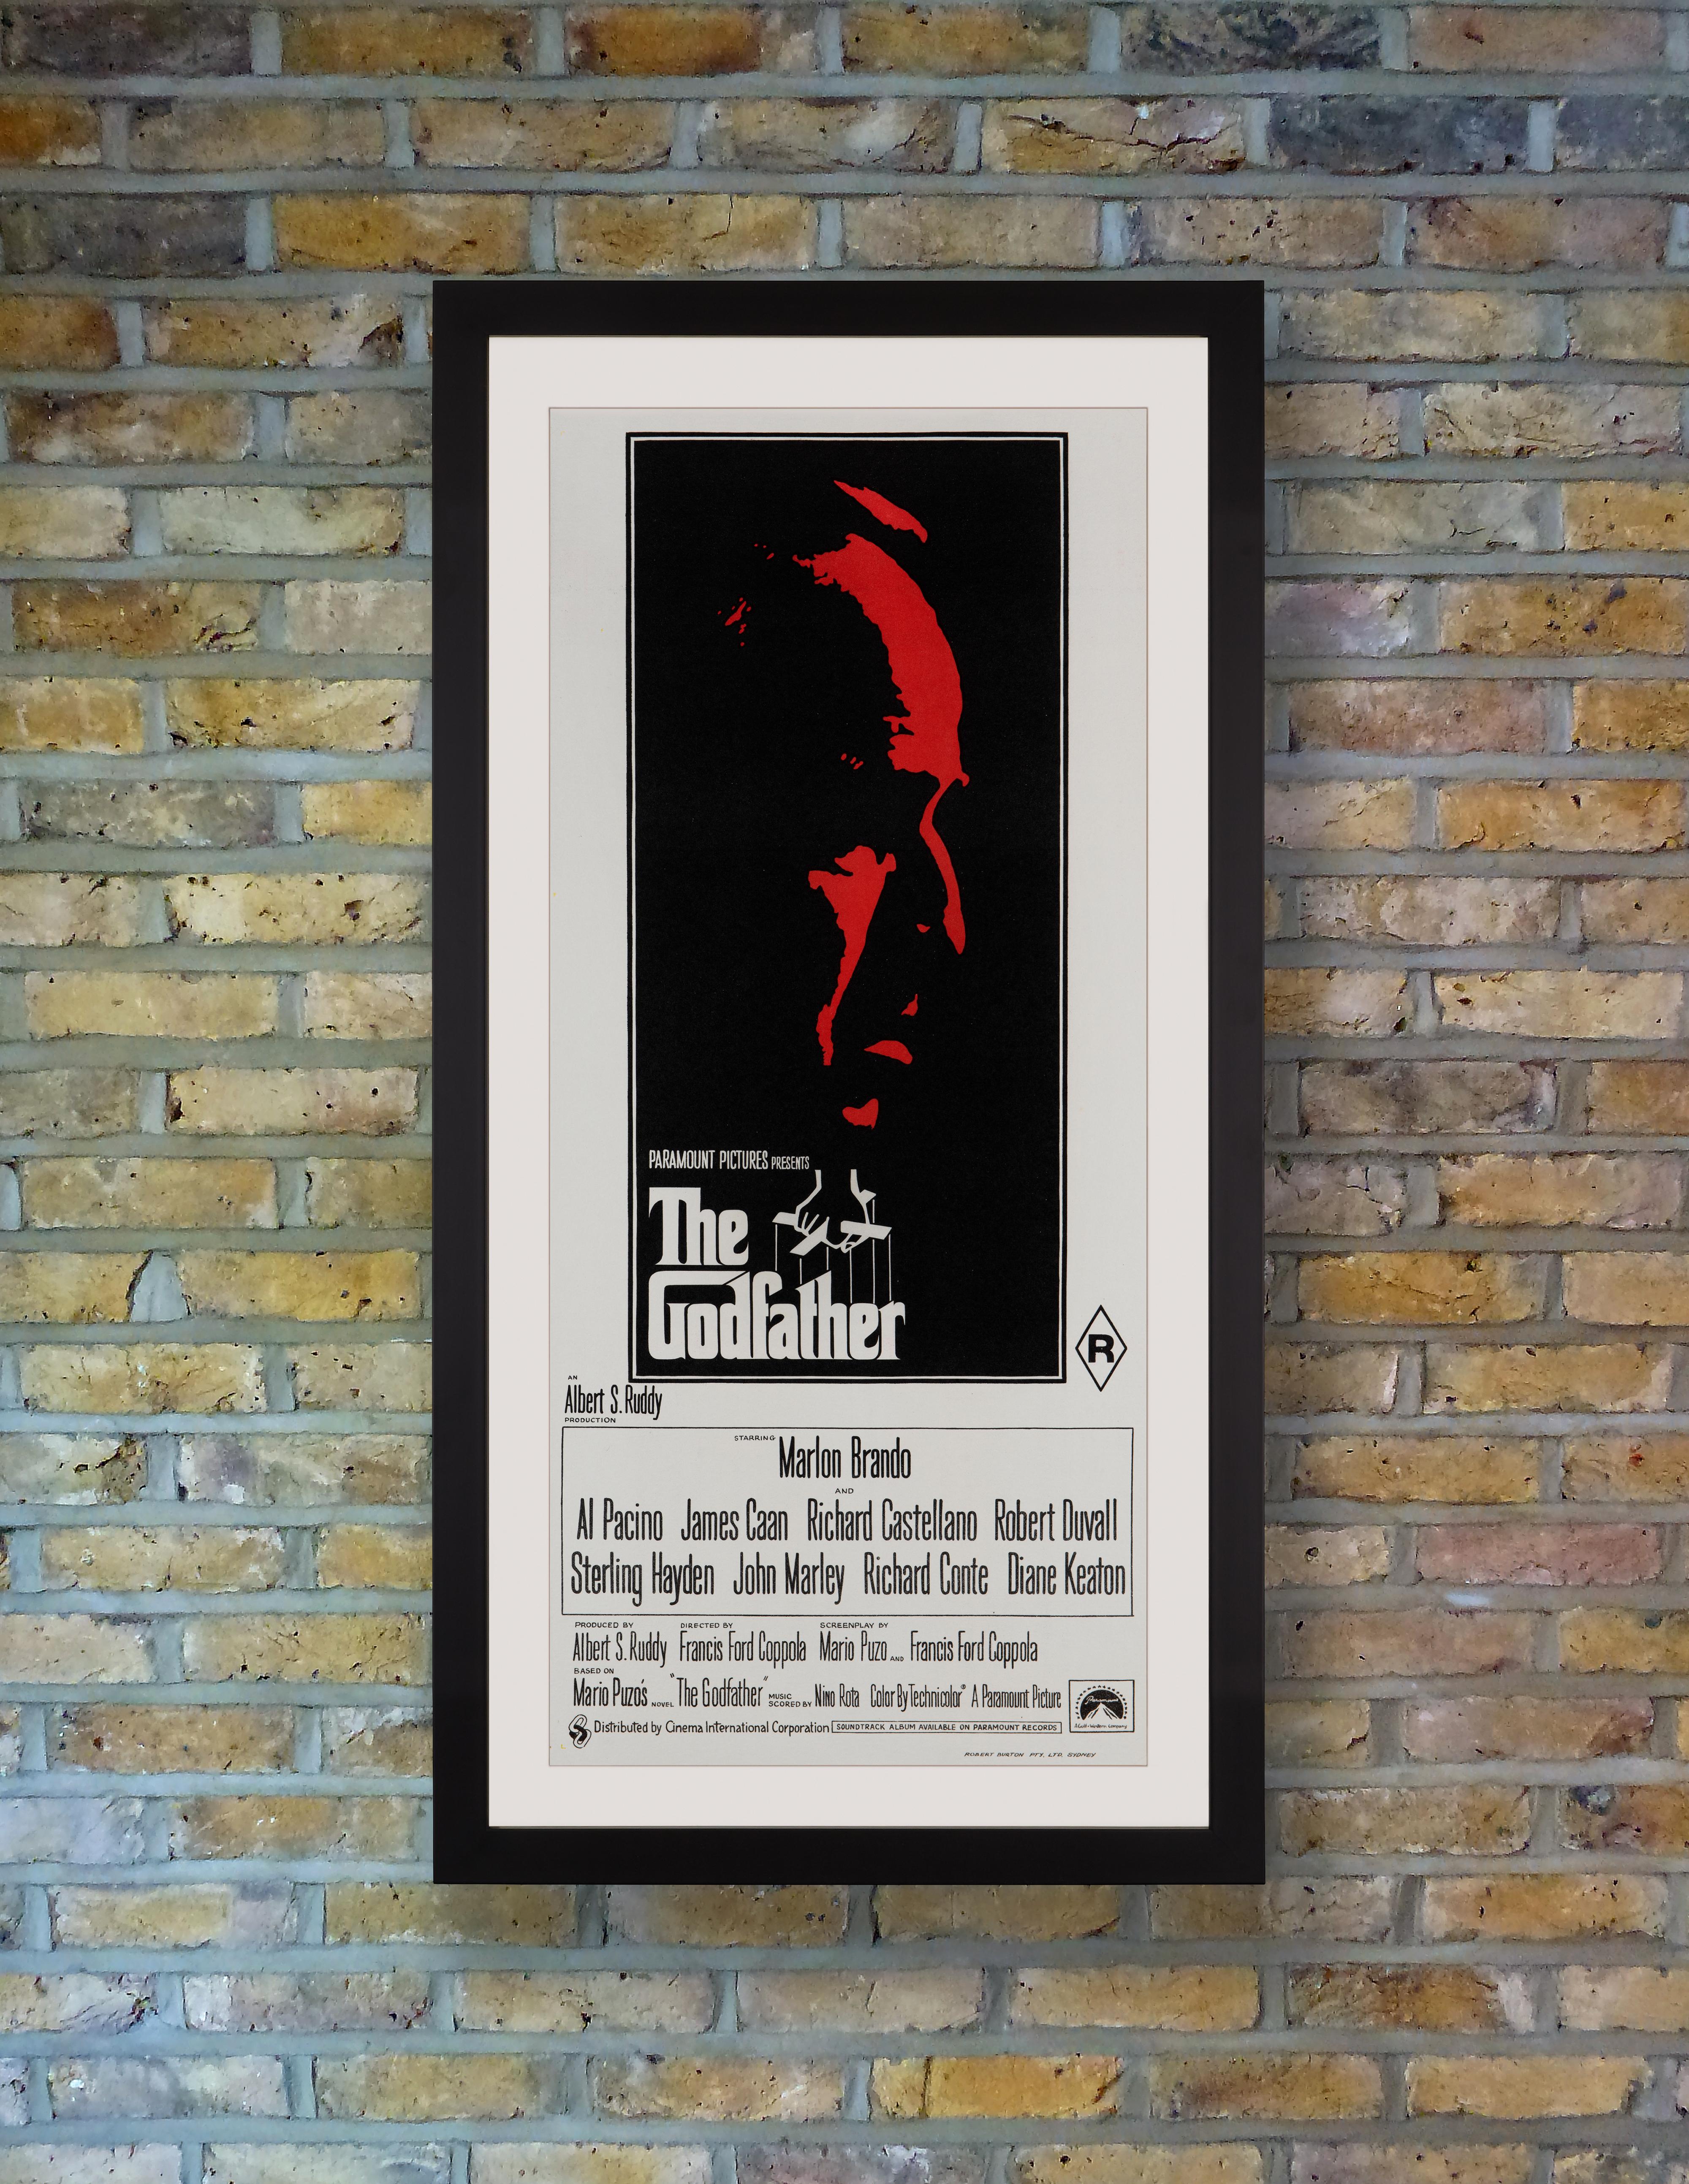 Widely celebrated as one of the best and most influential movies of all time, Francis Ford Coppola's 1972 mafia masterpiece 'The Godfather,' based on Mario Puzo's best selling novel of the same name, intimately follows the fictional Corleone family